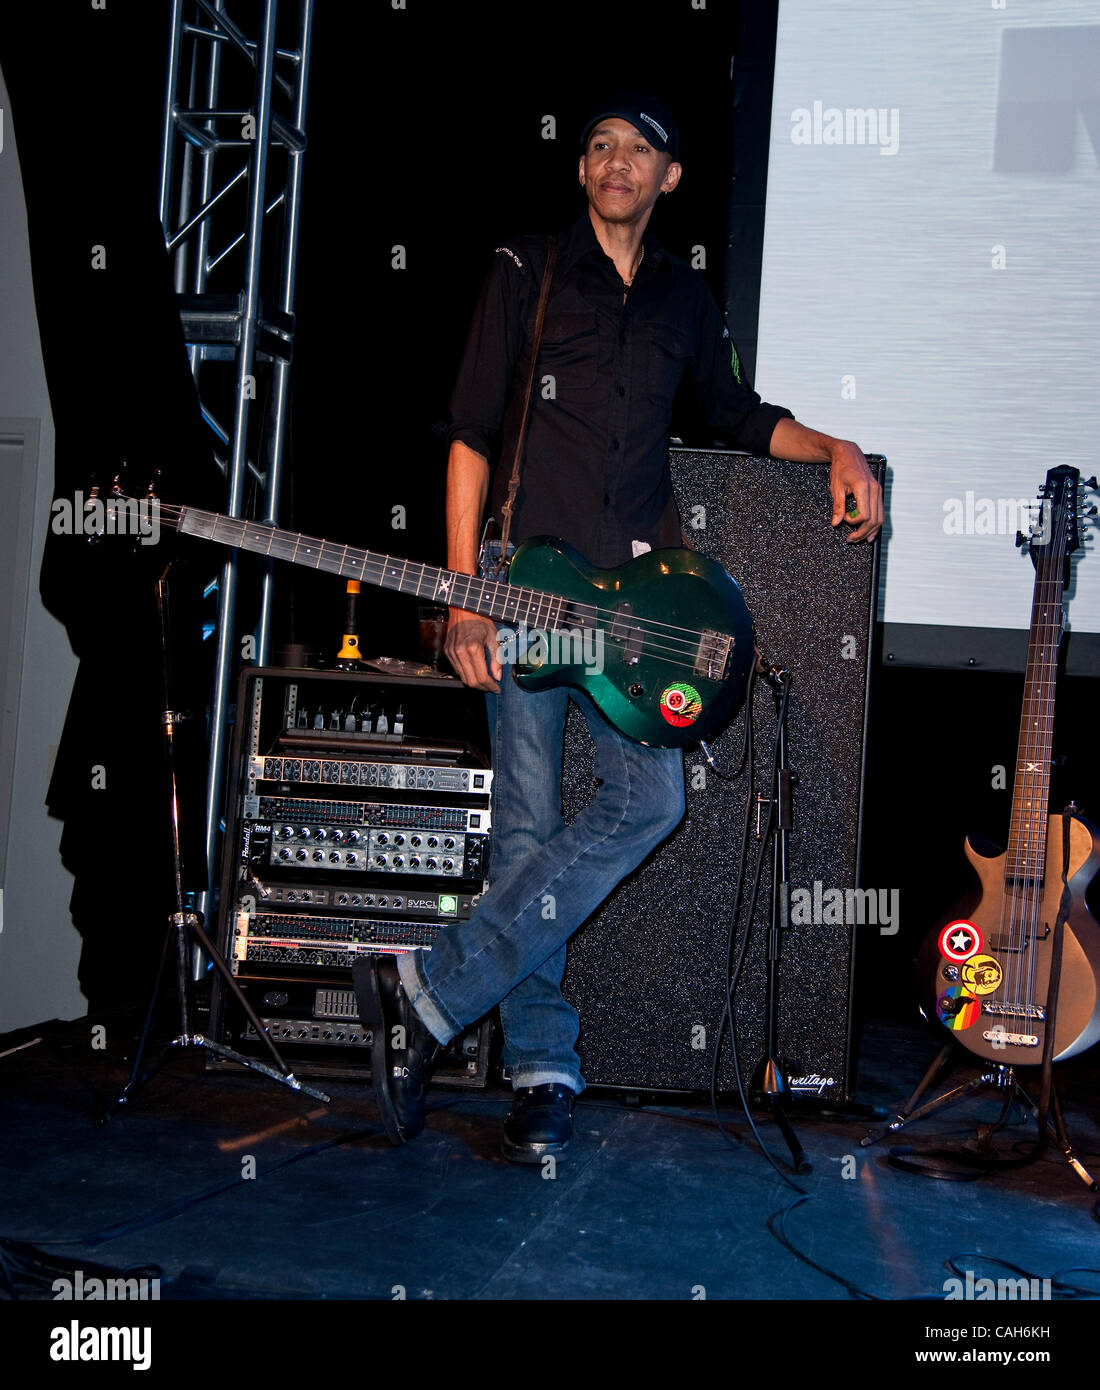 Jan. 14, 2011 - Anaheim, California, USA -  DOUG PINNICK of King's X on the Ampeg Stage during the NAMM Show 2011, the annual convention of the National Association of Music Merchants at the Anaheim Convention Center.(Credit Image: © Brian Cahn/ZUMAPRESS.com) Stock Photo